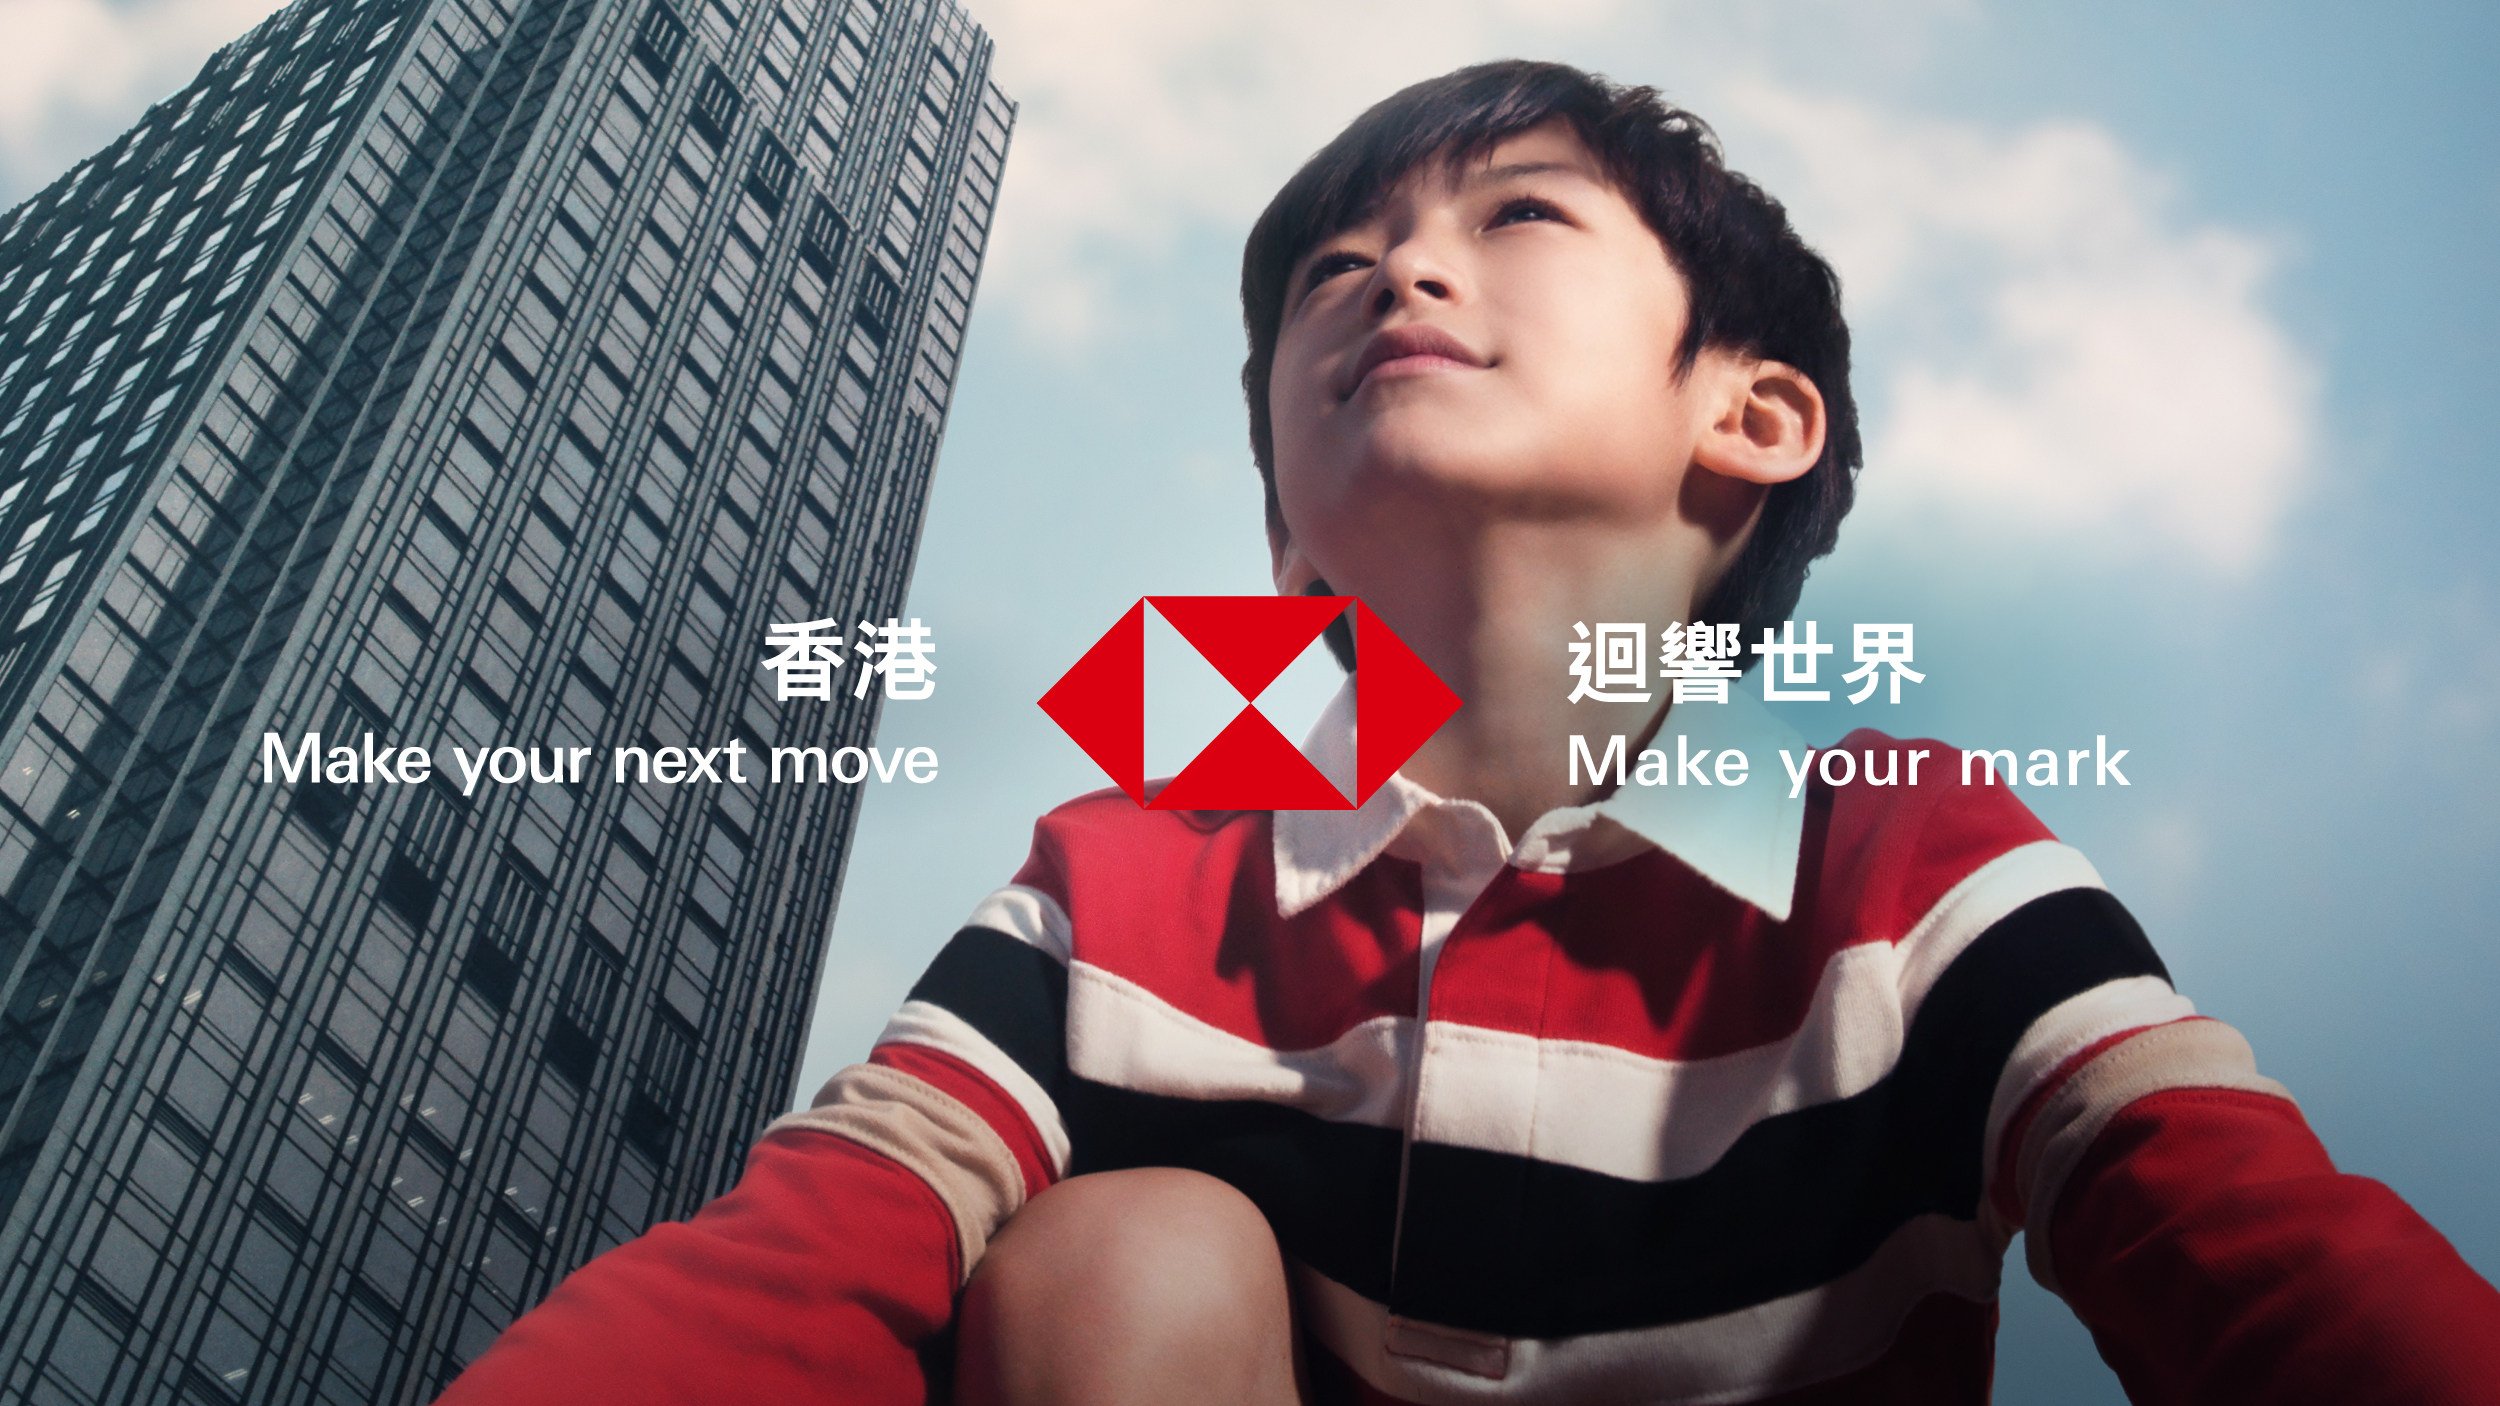 Make your next Move. Make Your Mark with HSBC’s latest brand campaign film directed by Jack Ng.